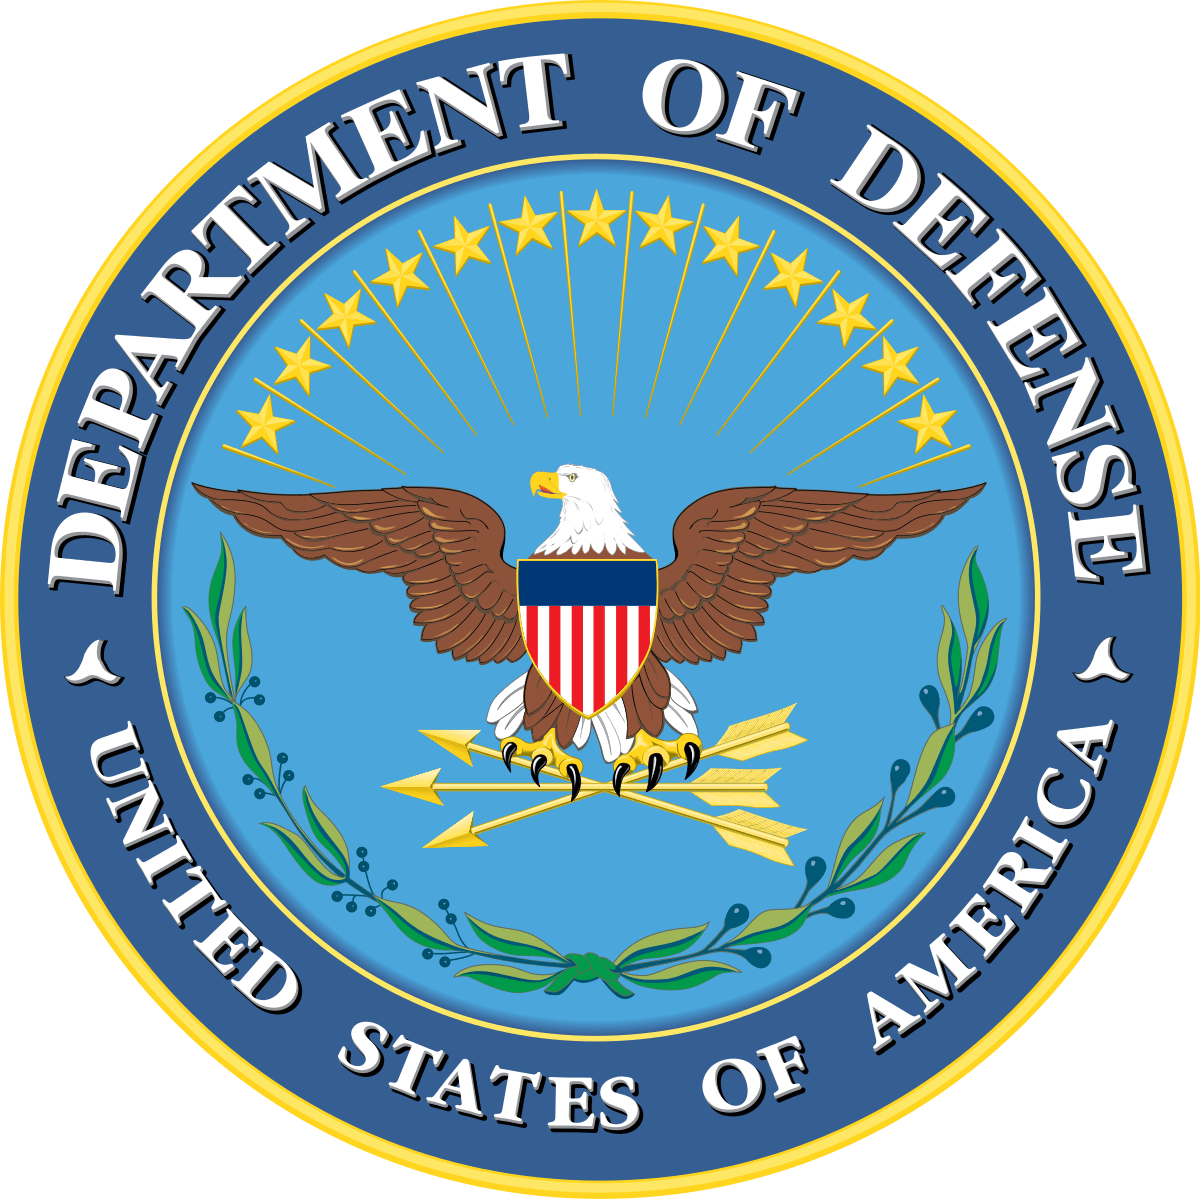 United States of America Department of Defense